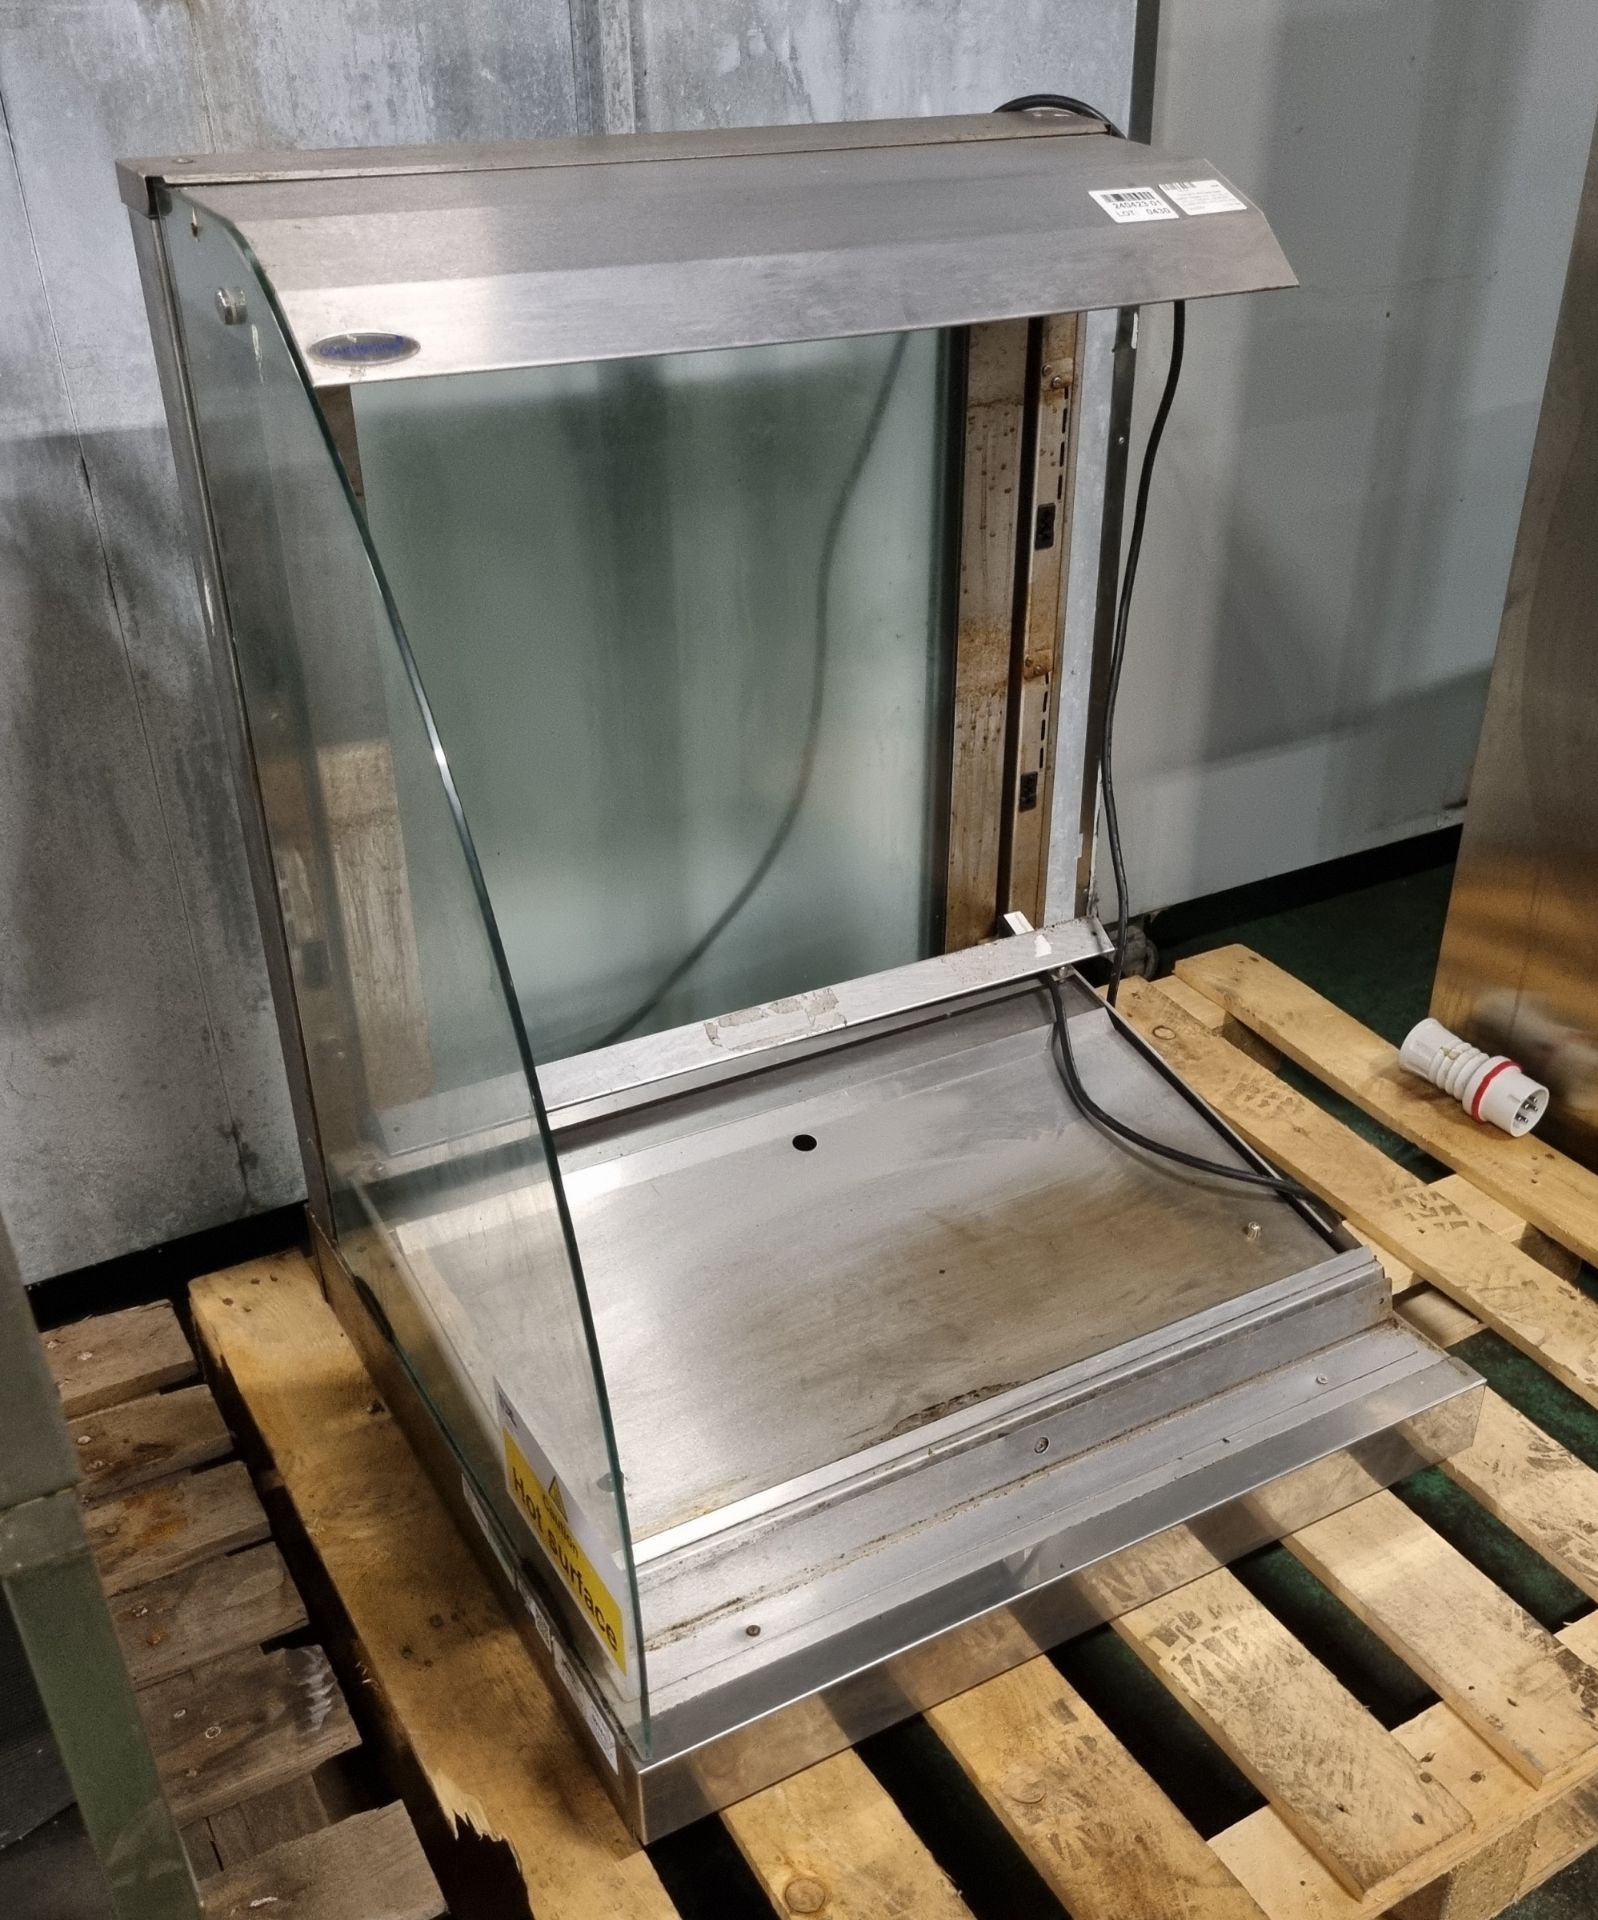 Counterlin stainless steel heated display unit - W 700 x D 670 x H 900mm - MISSING GLASS PANEL - Image 4 of 4